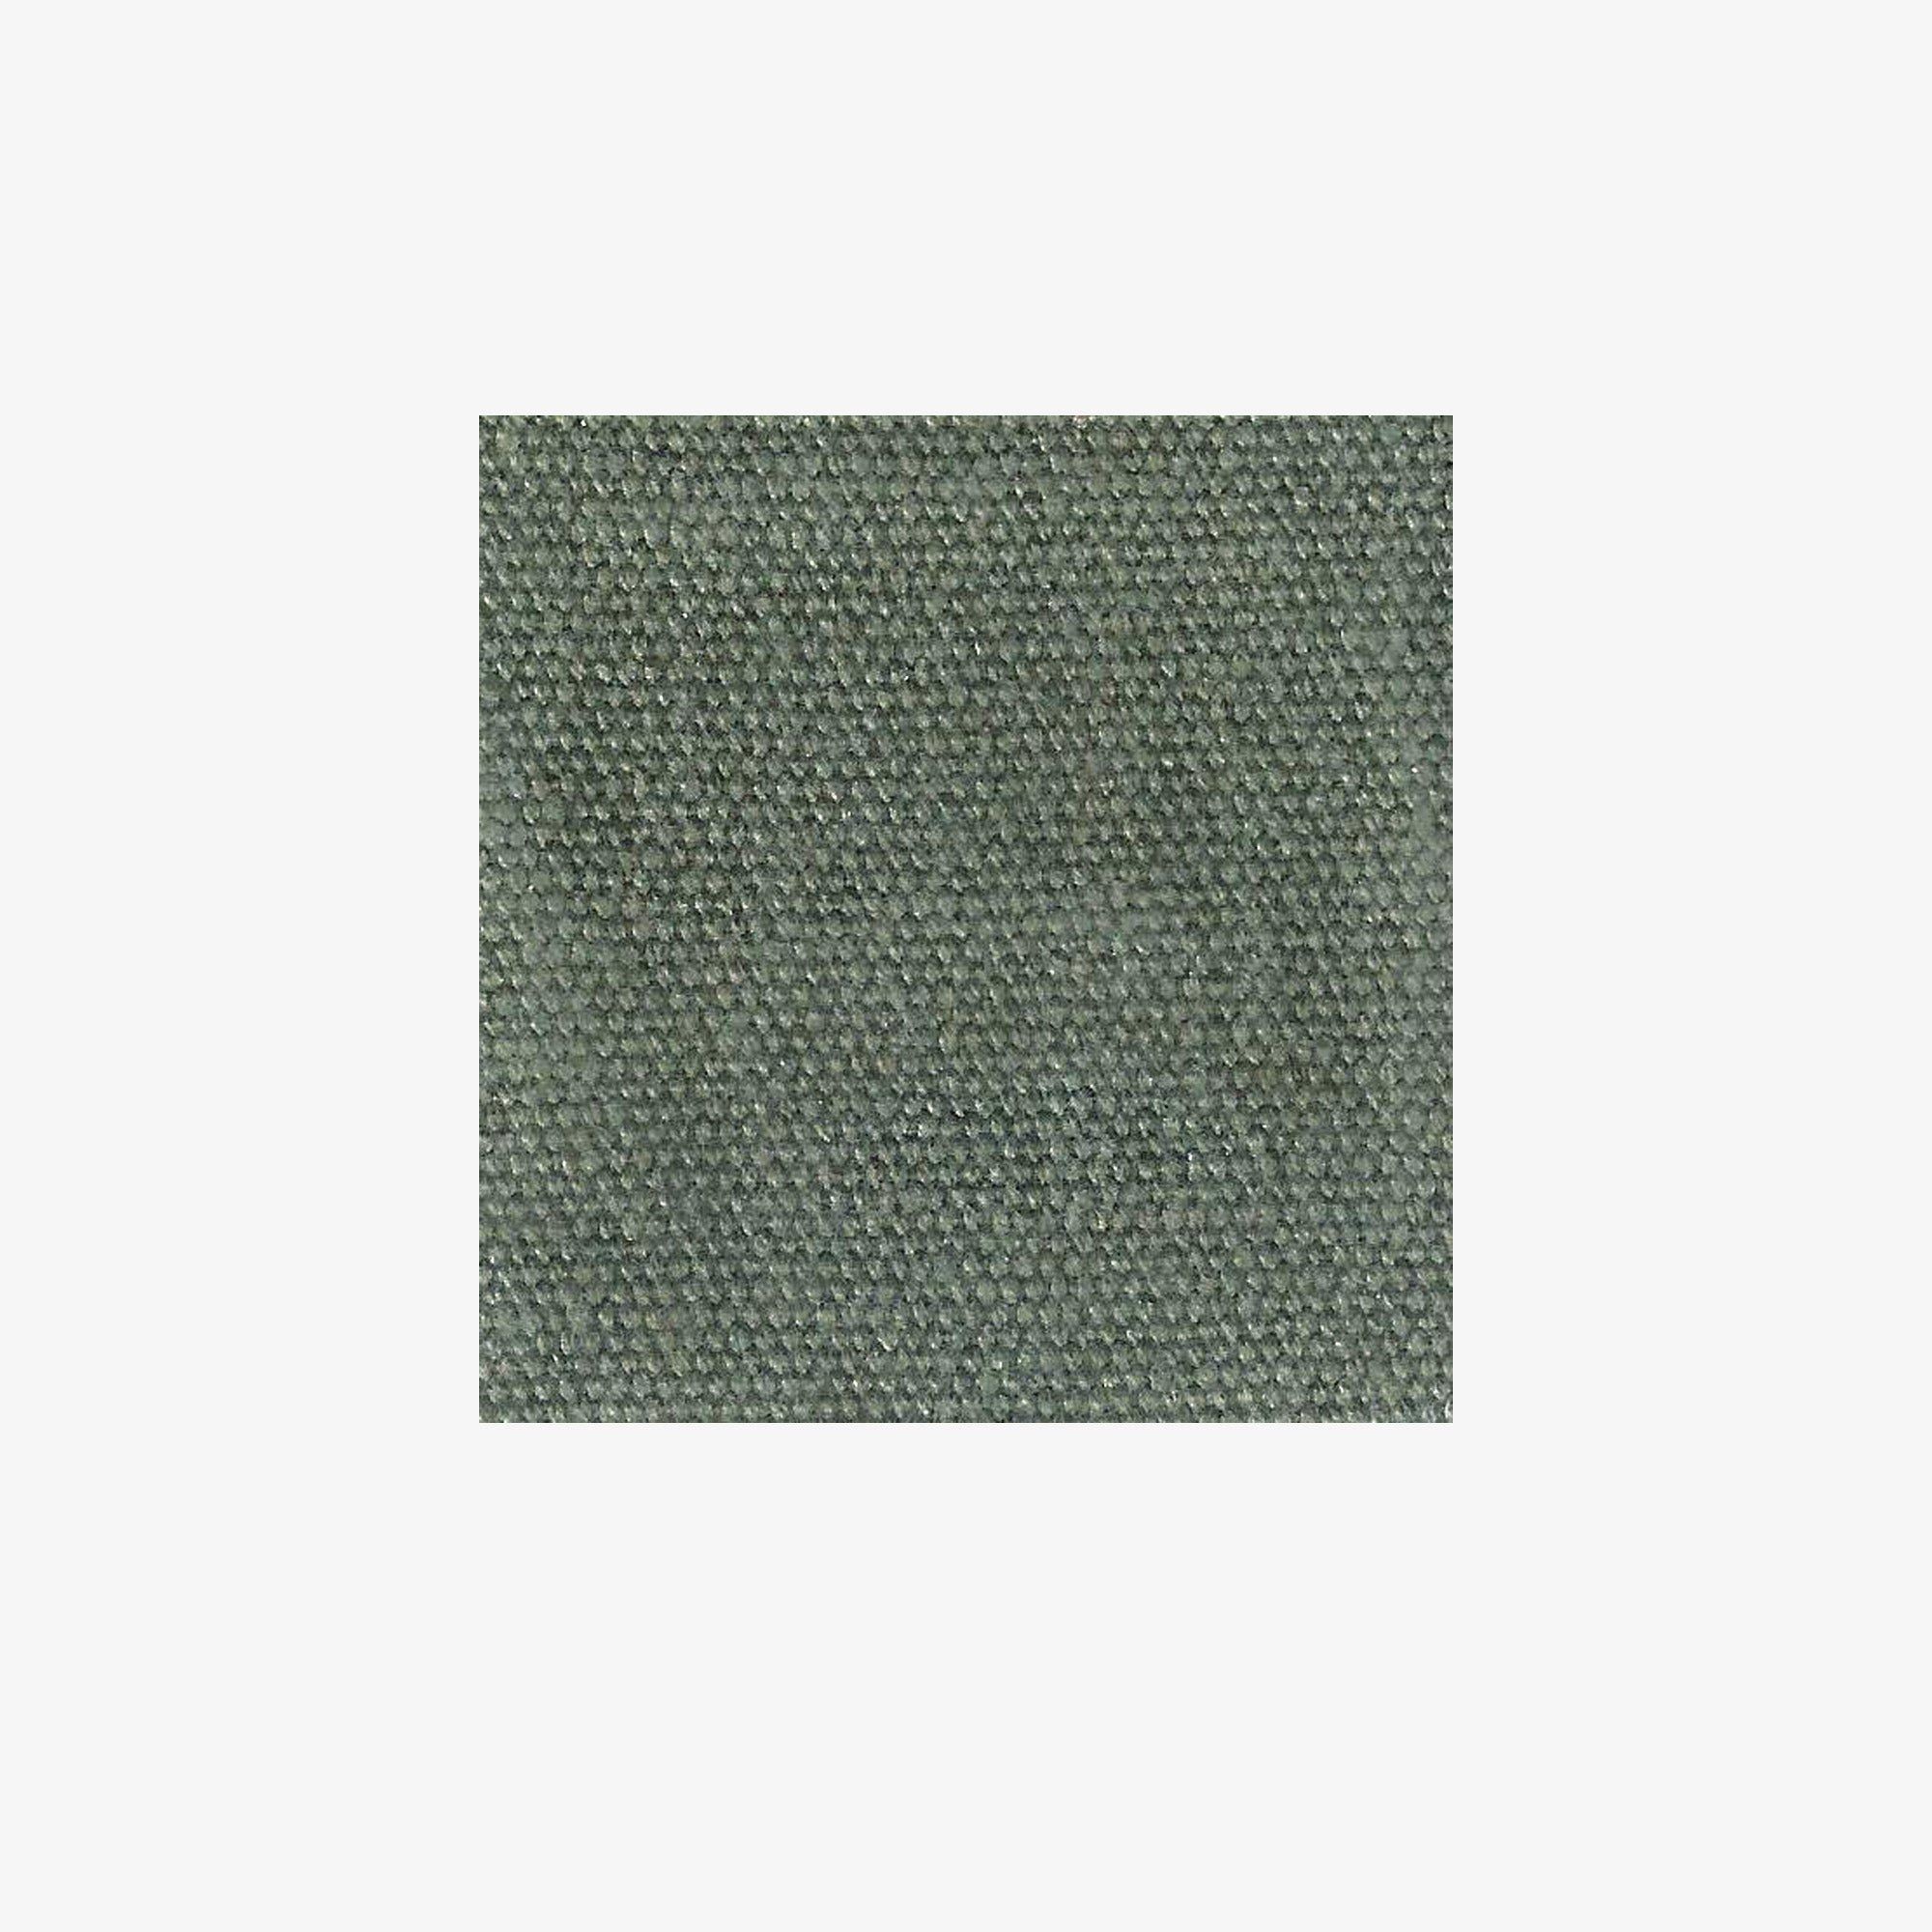 Case Odyssey - Sessel - Textured Cotton Green--6